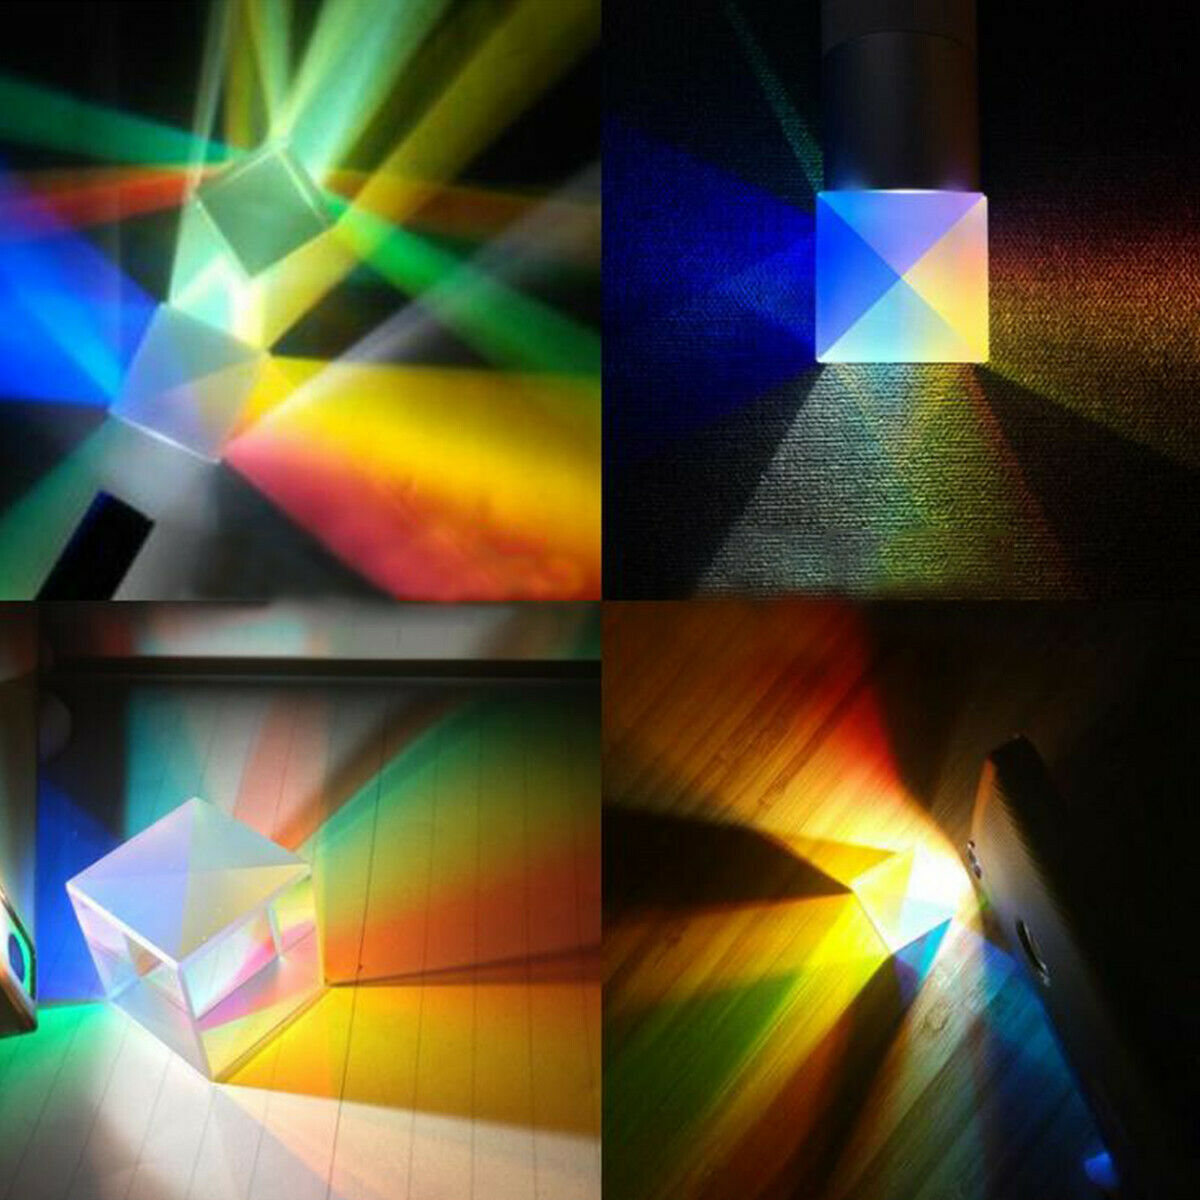 18X18X18 MM Optical Glass X-cube Dichroic Cube Prism RGB Combiner Splitter Gift